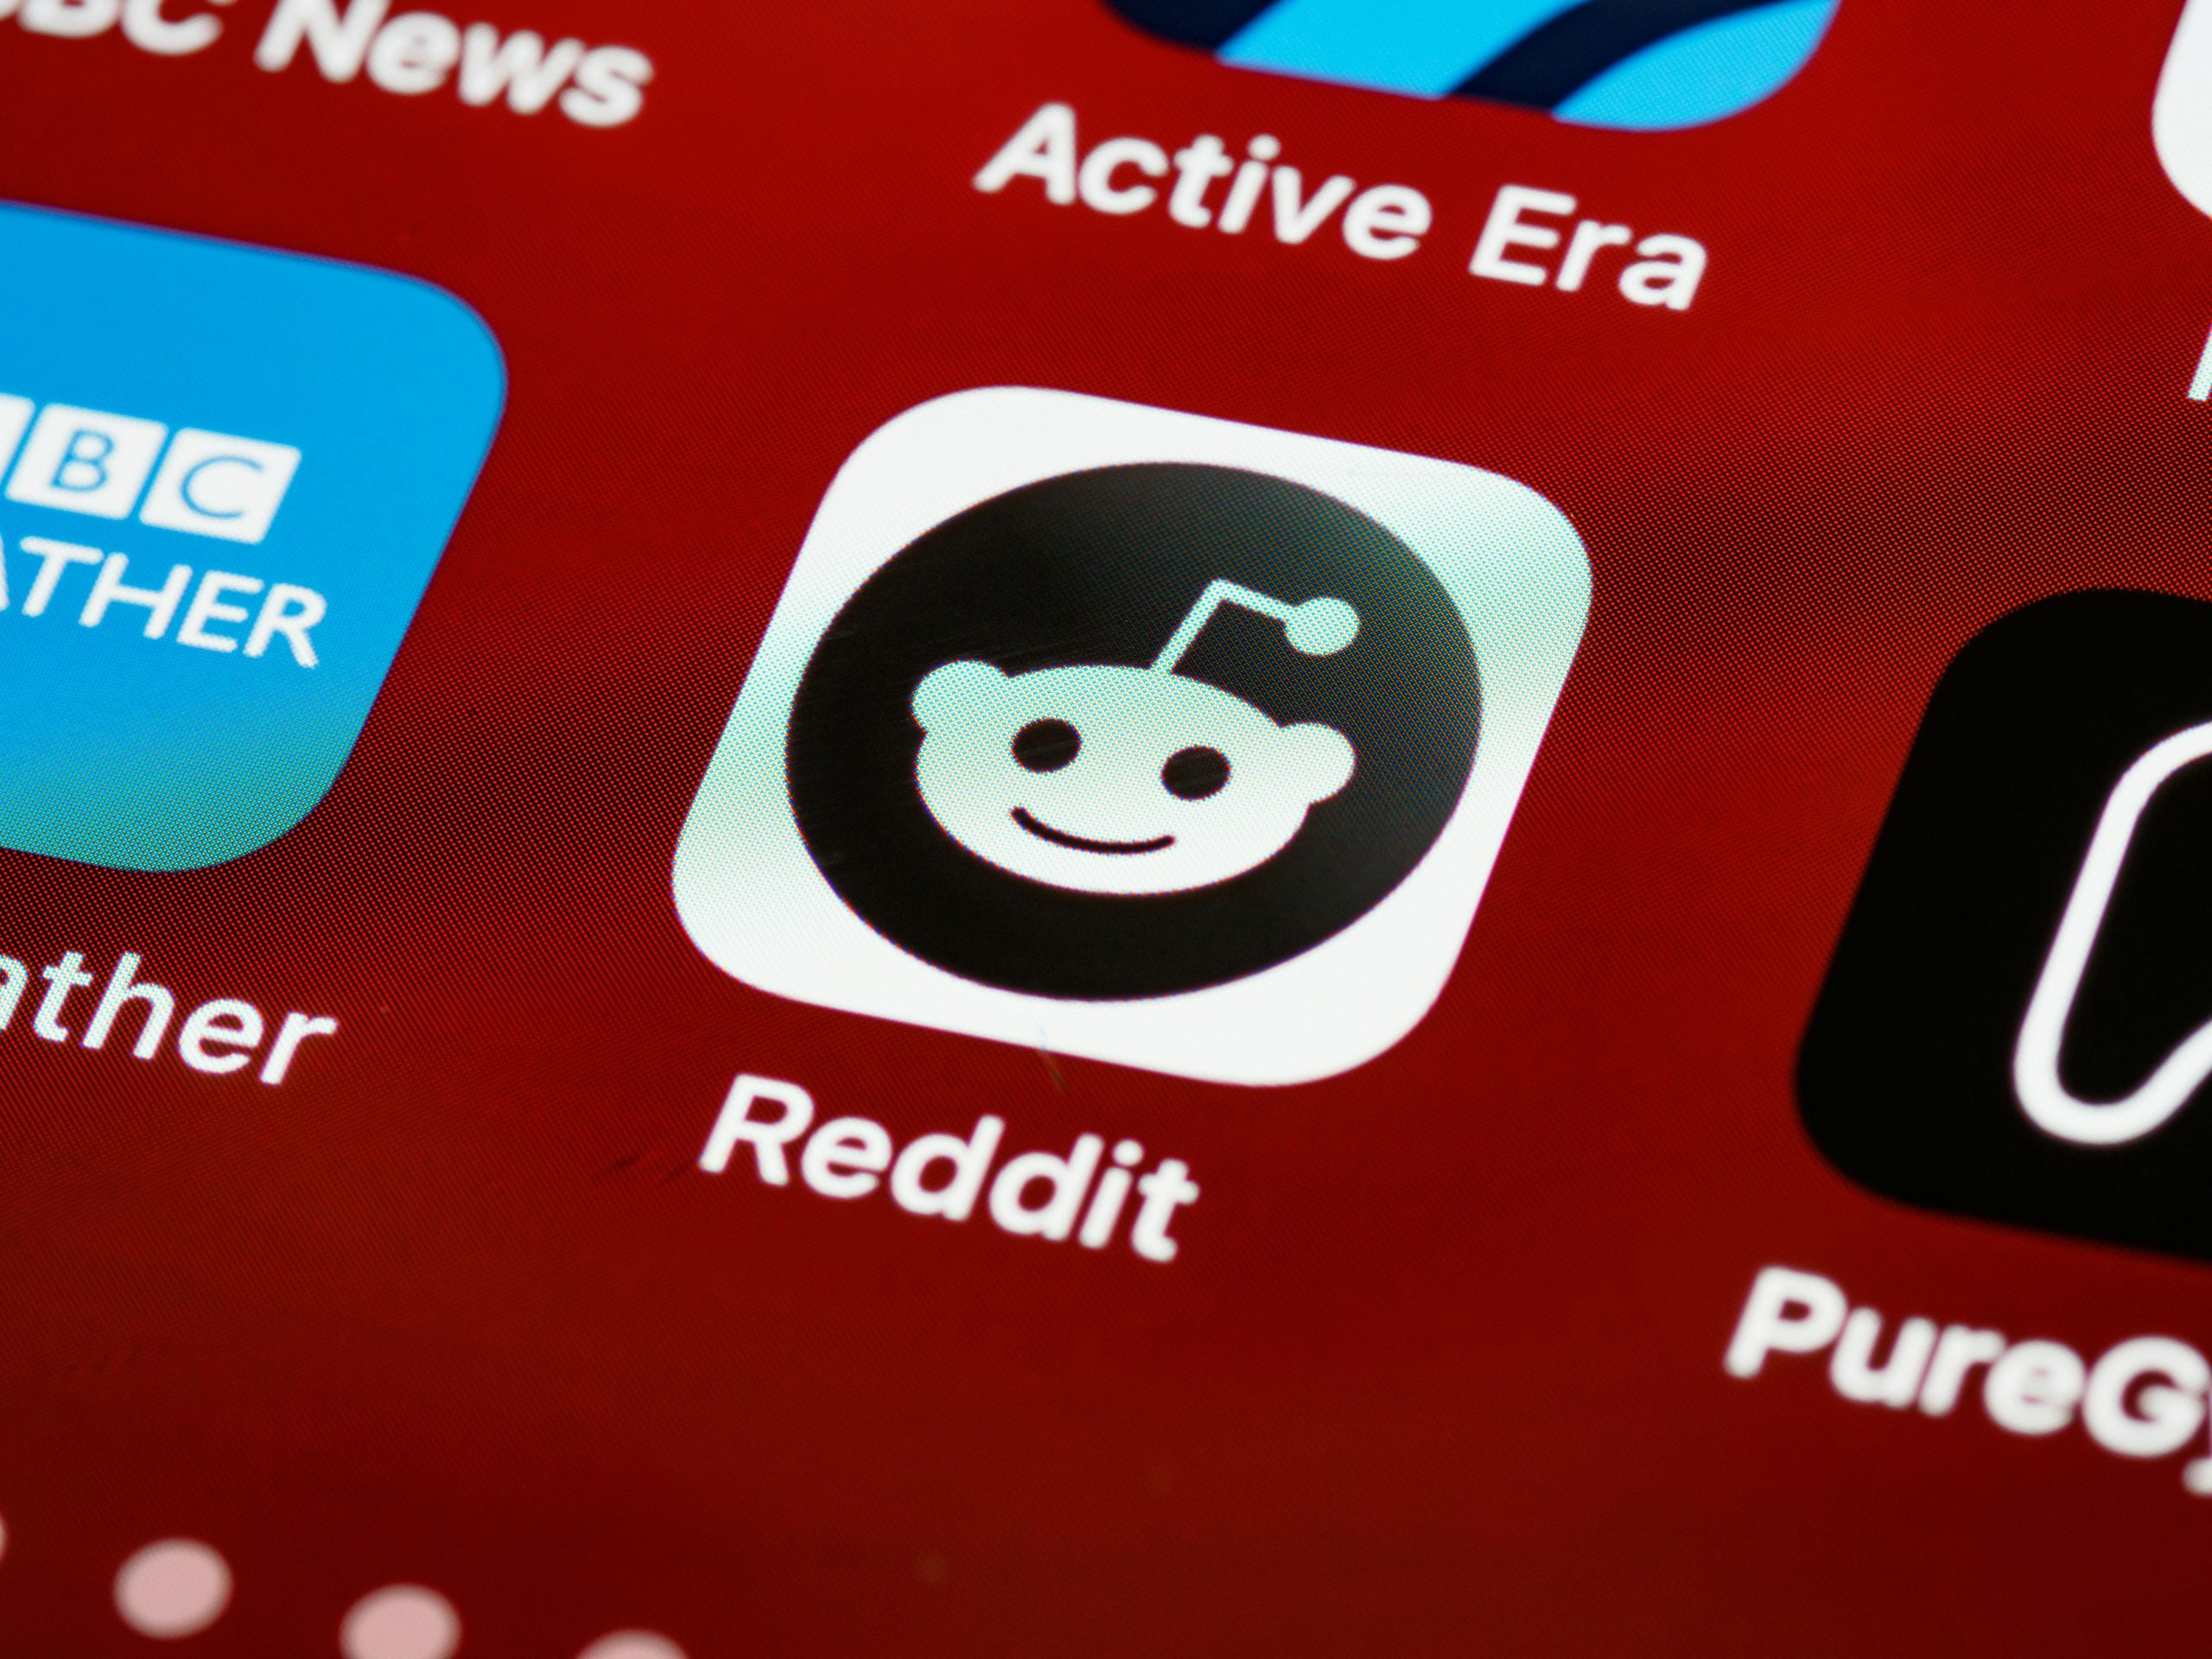 Reddit prepares to go public launch with IPO in March: report